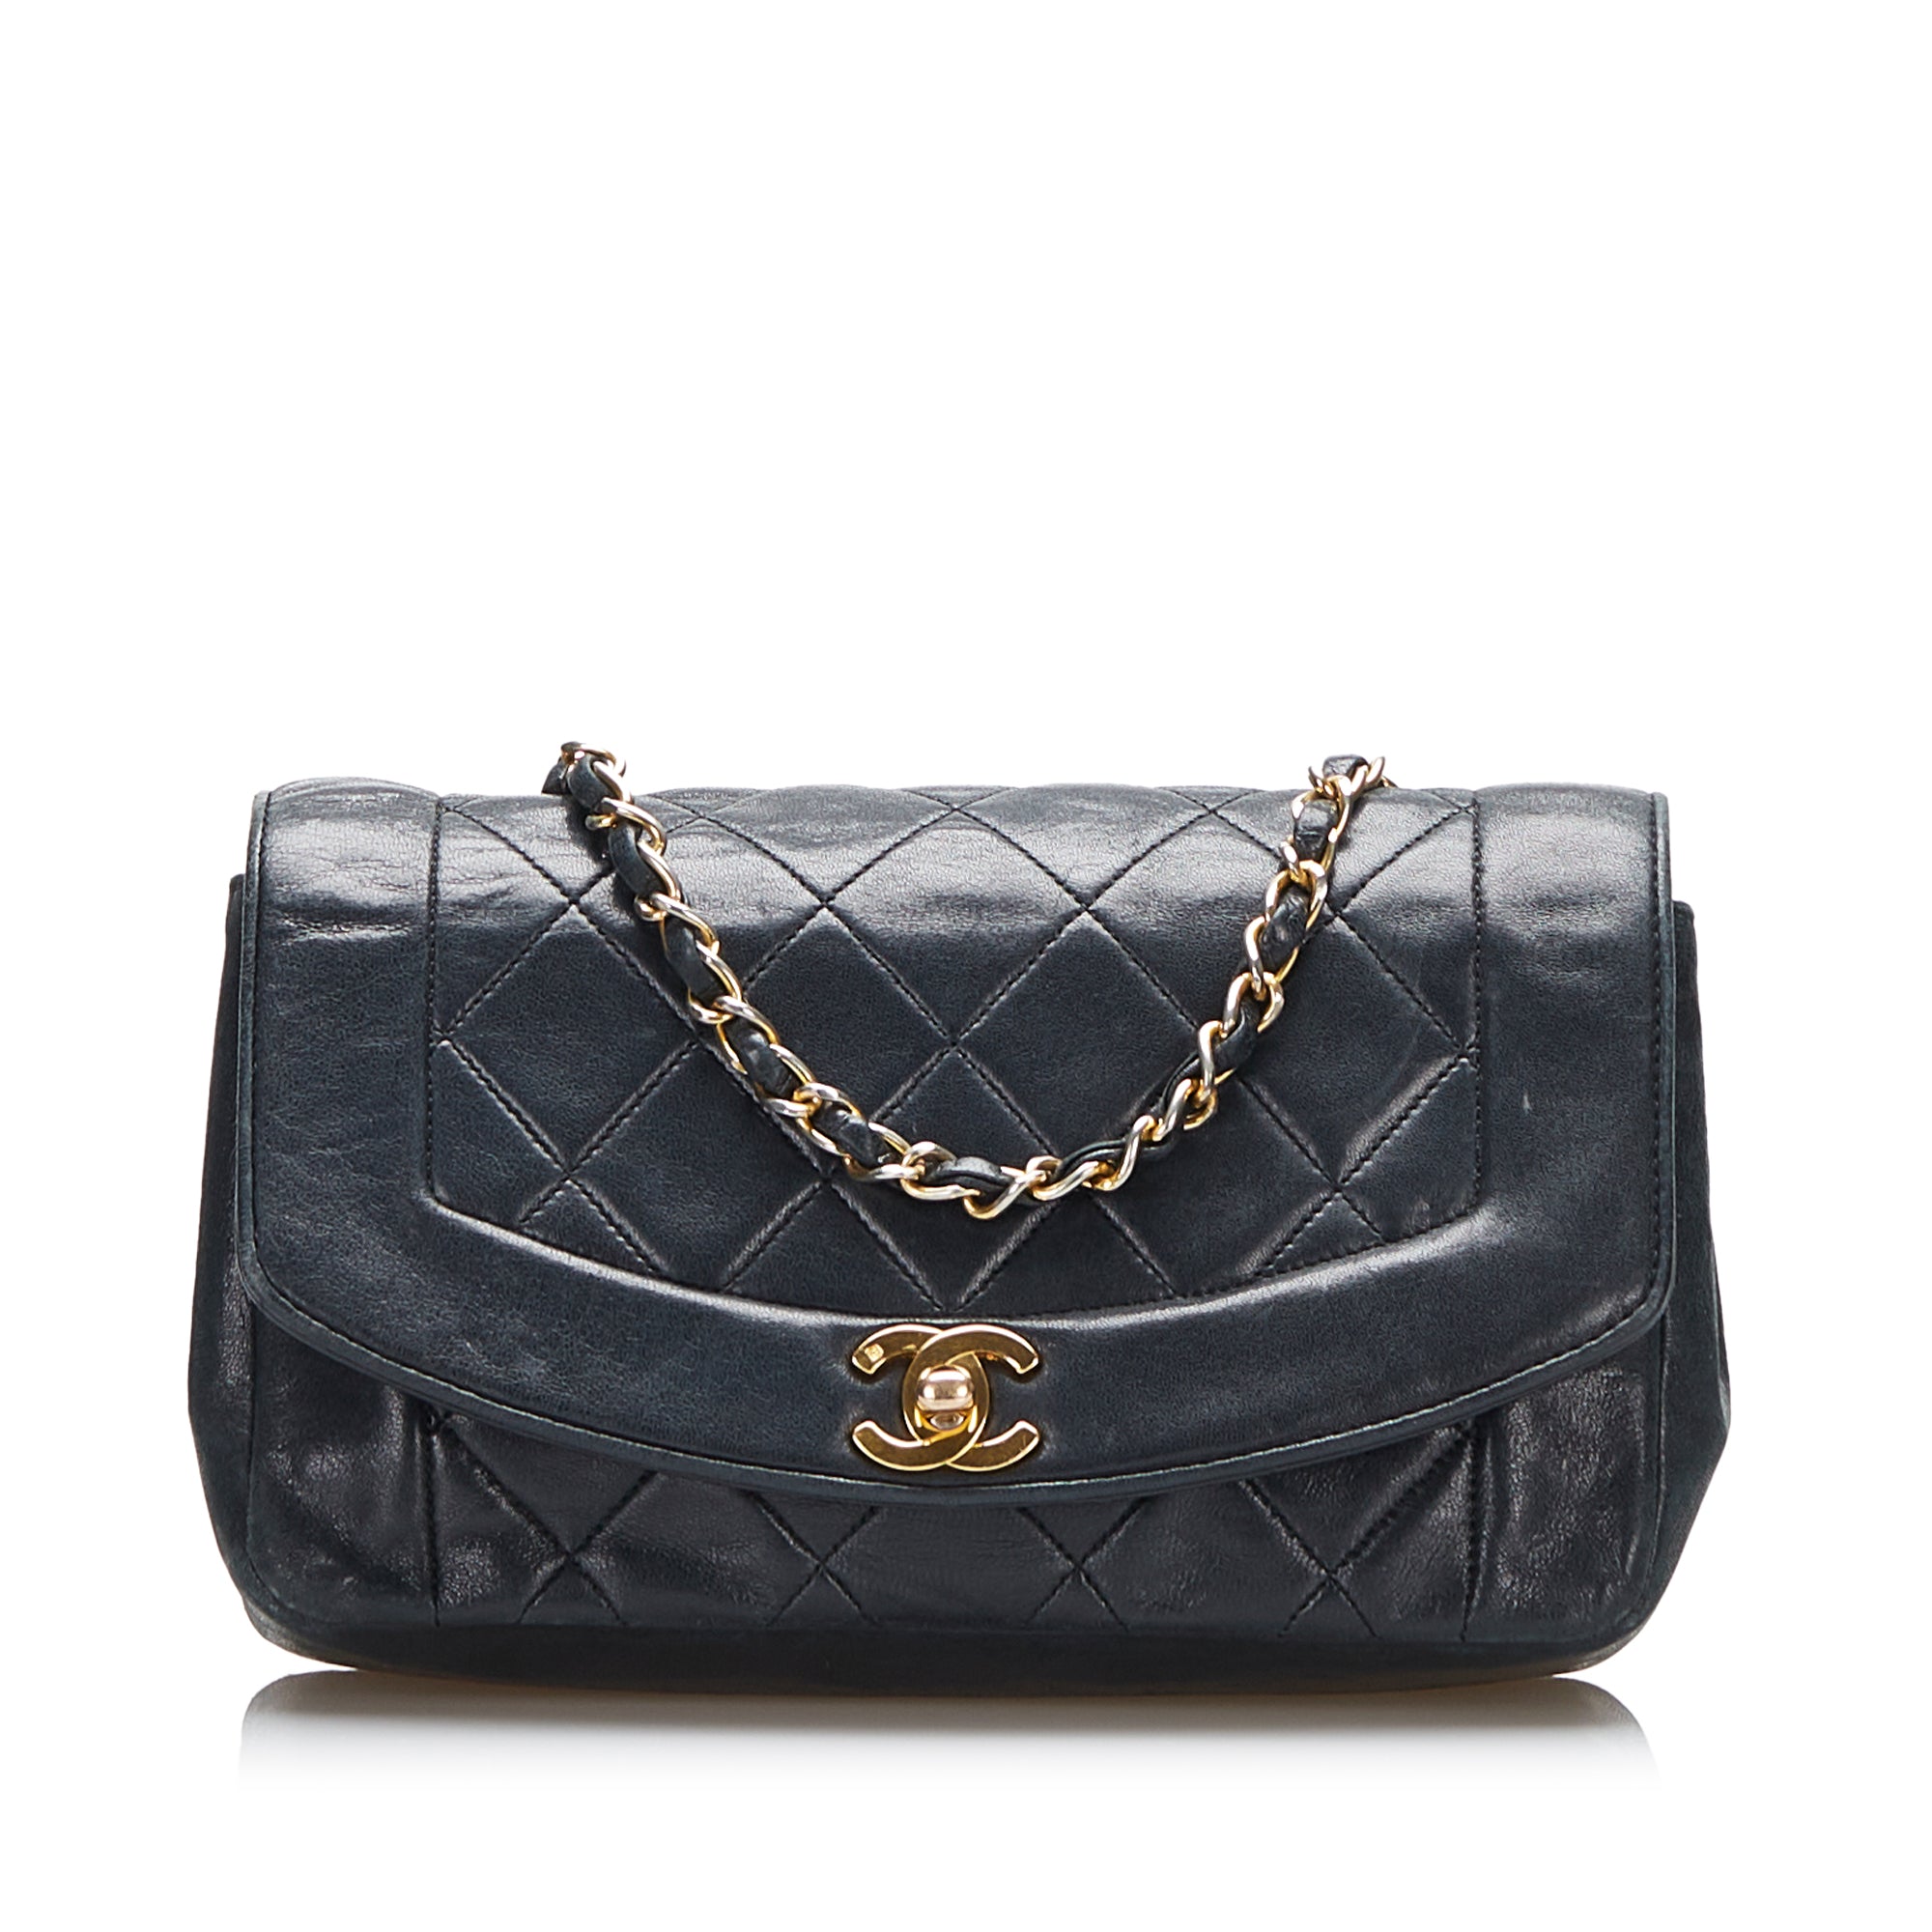 Diana Class Flap Cross Body Bag (Authentic Pre-Owned)  Vintage chanel bag,  Leather crossbody bag, Crossbody bag